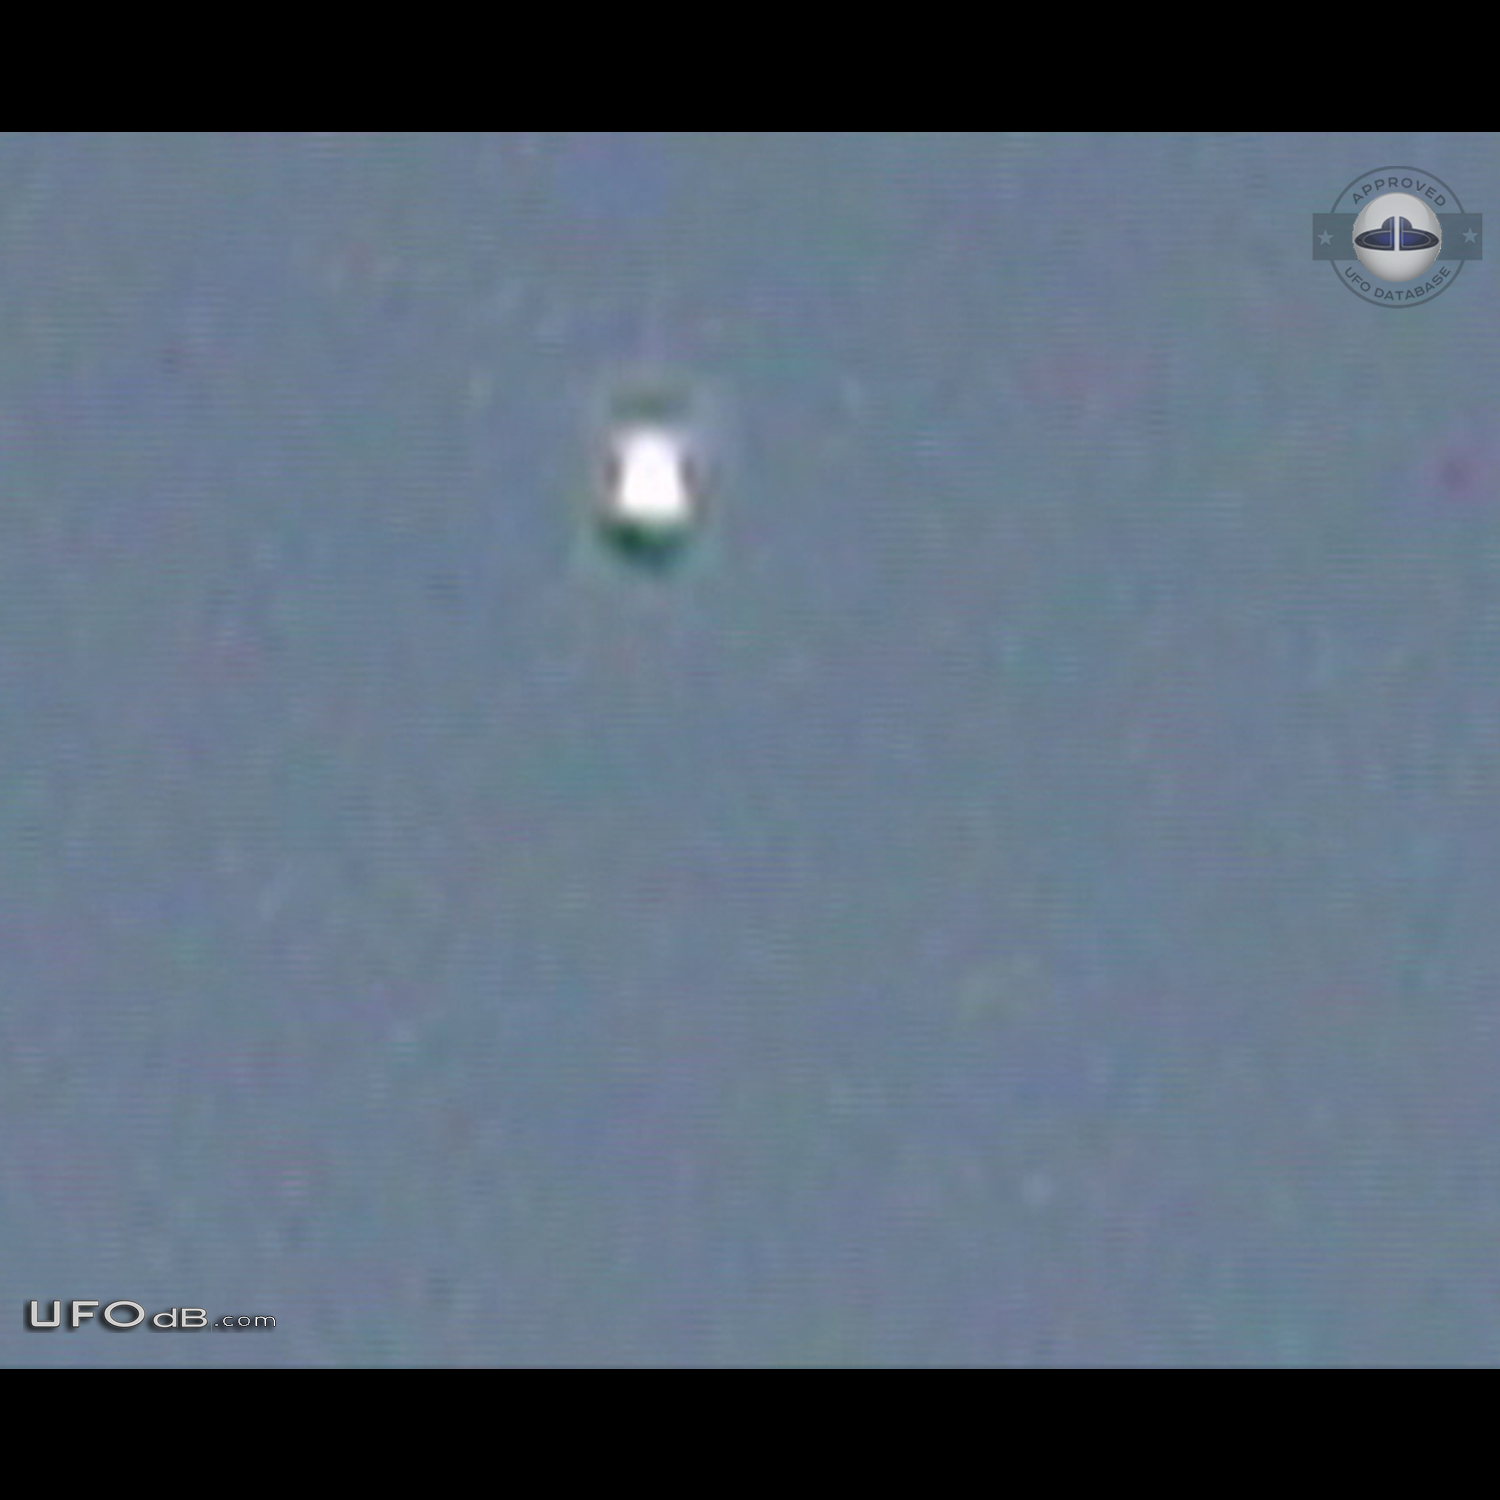 UFO came to about 2000 in elevation from the 30 000 feet - Canada 2011 UFO Picture #698-2